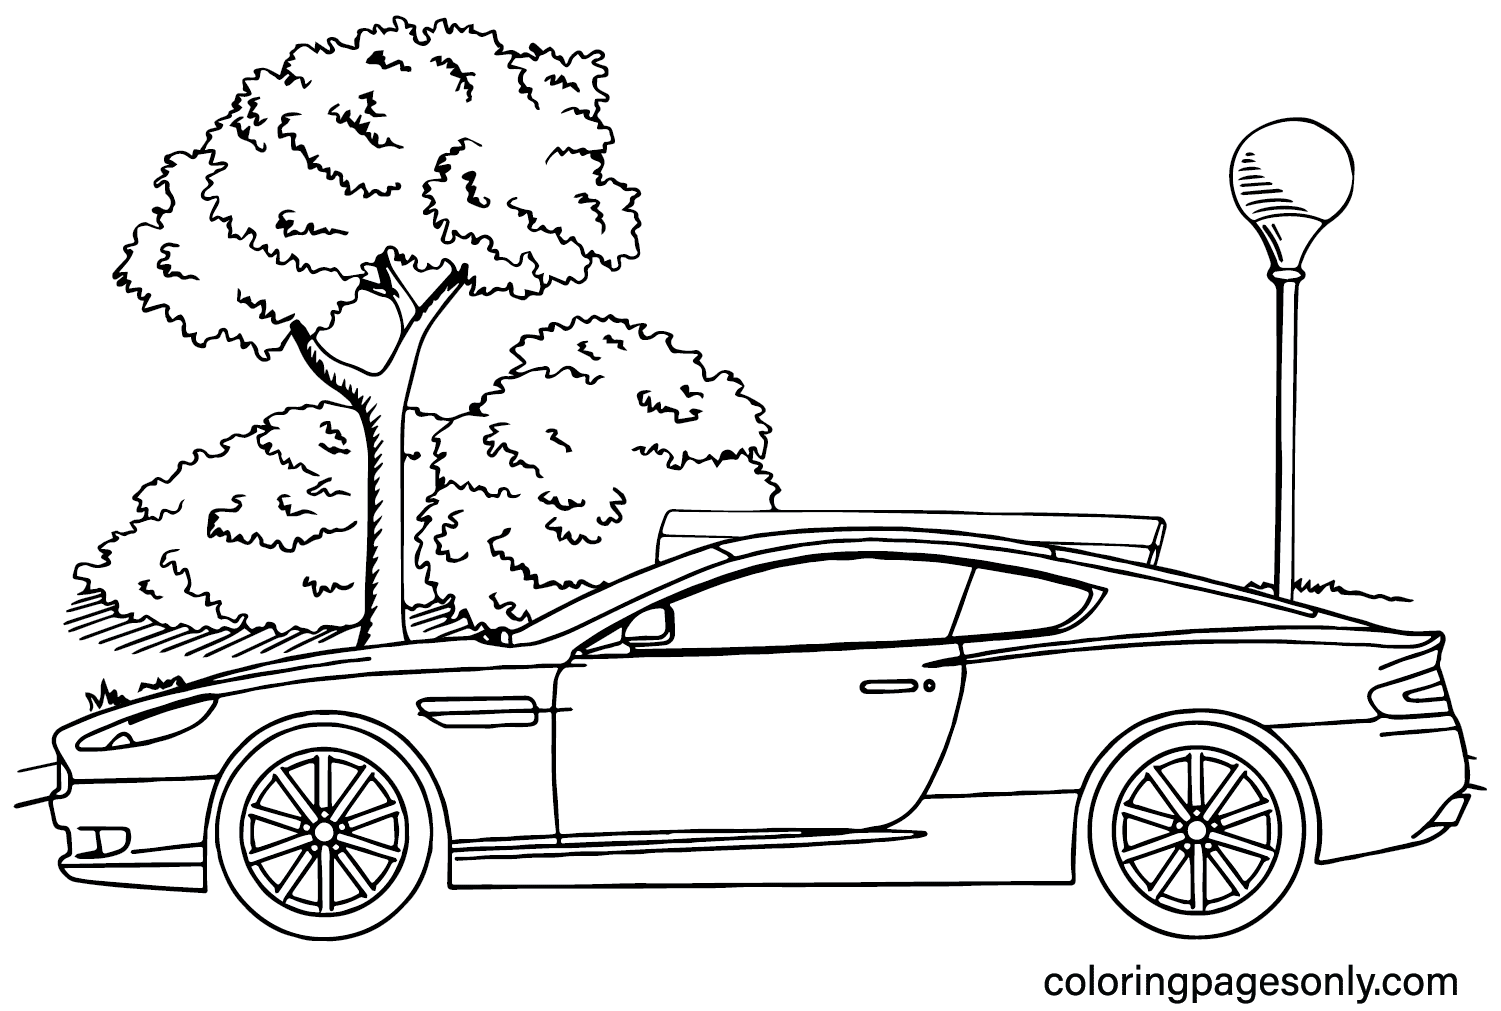 Aston Martin DB9 2005 Coloring Page from Aston Martin